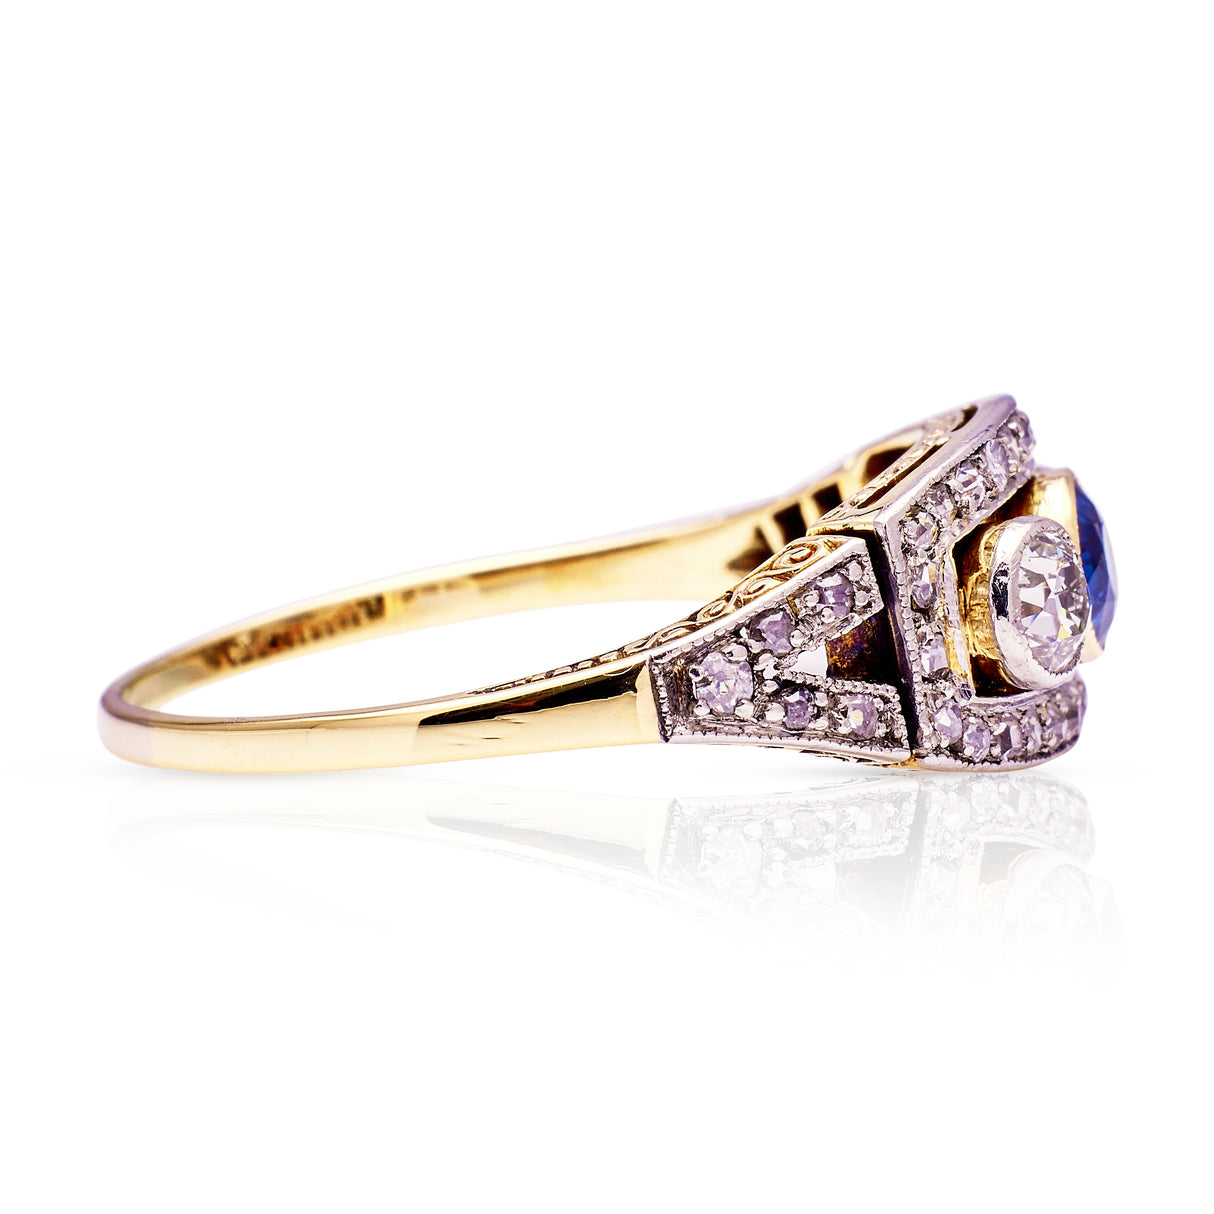 Antique, Belle Époque Sapphire and Diamond Three Stone Ring, 18ct Yellow Gold and Platinum side view